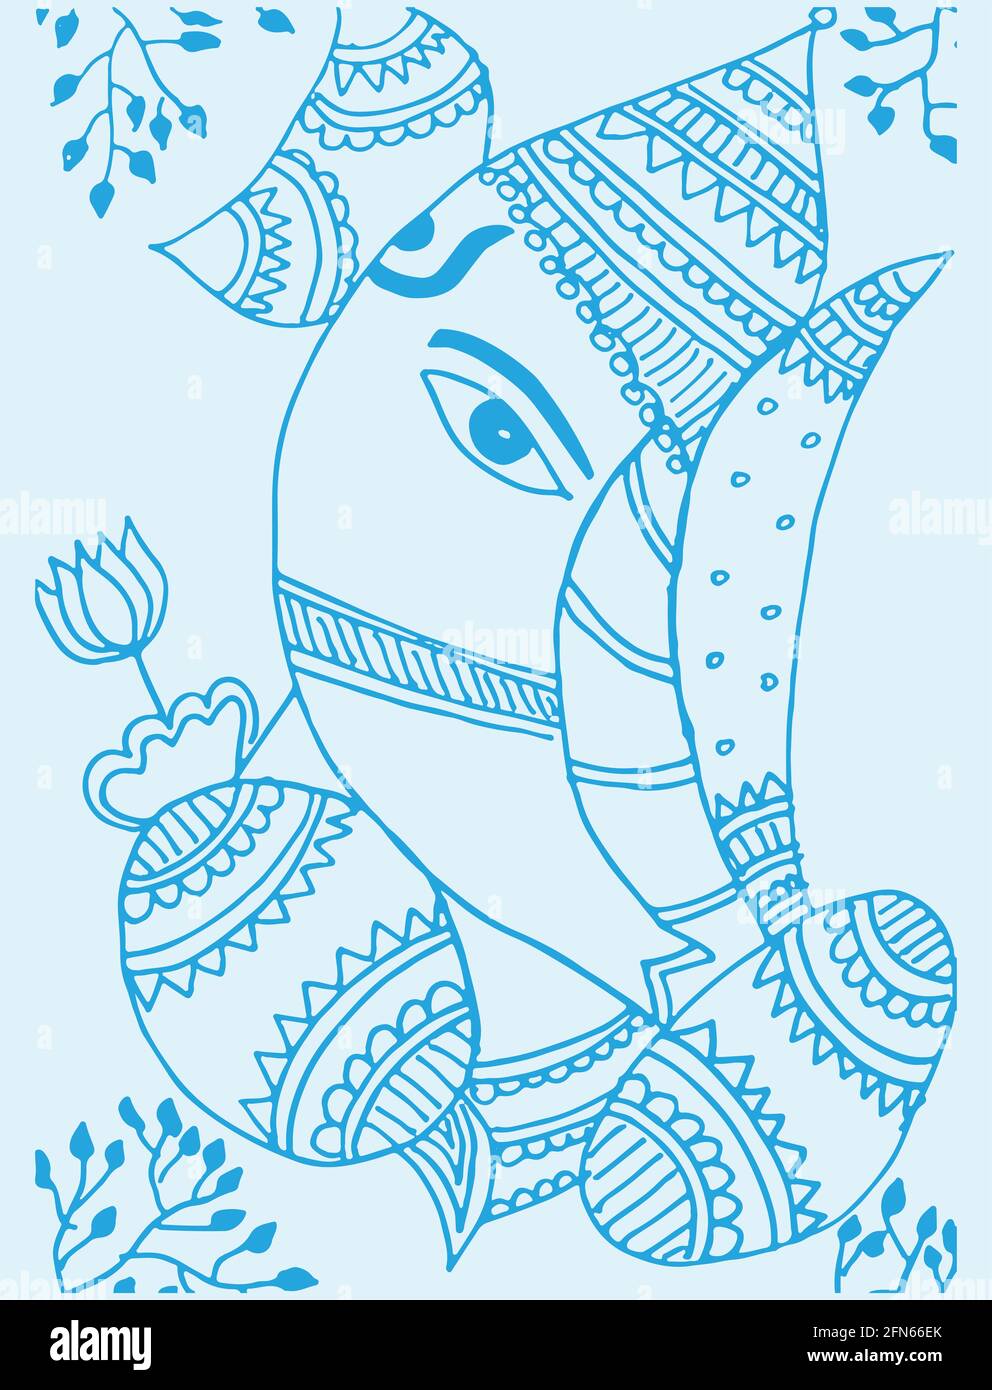 Black And White Bal Ganesha Sketch A3 Size, Size: 295*425mm